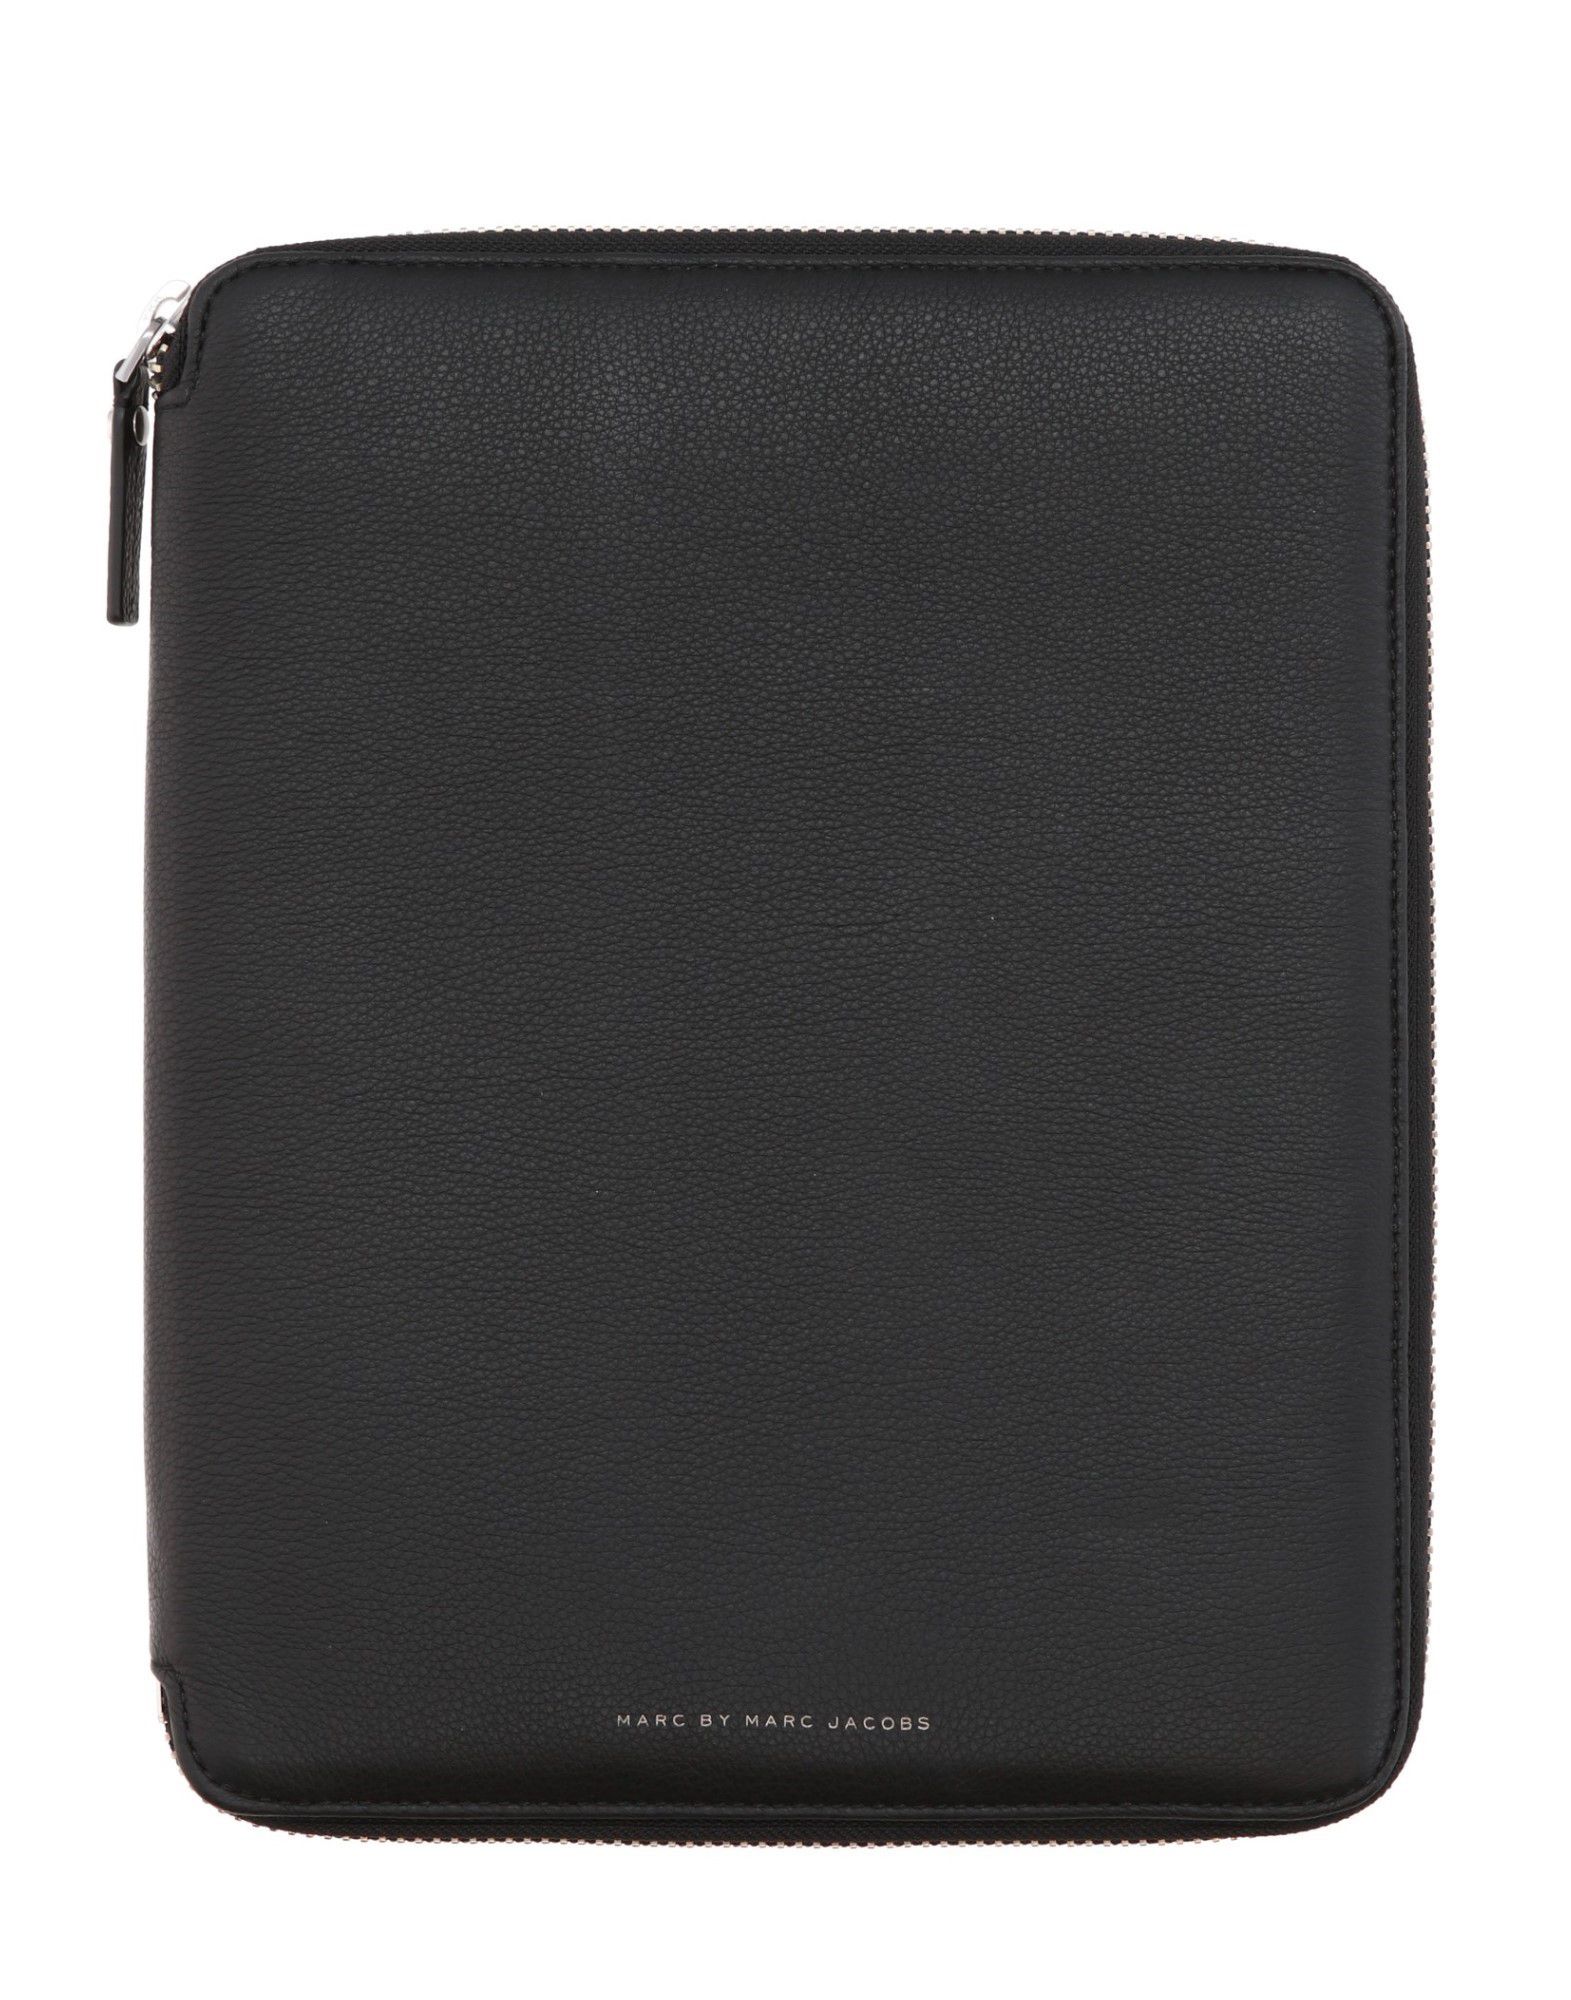 MARC BY MARC JACOBS DOCUMENT HOLDERS,45363467JB 1